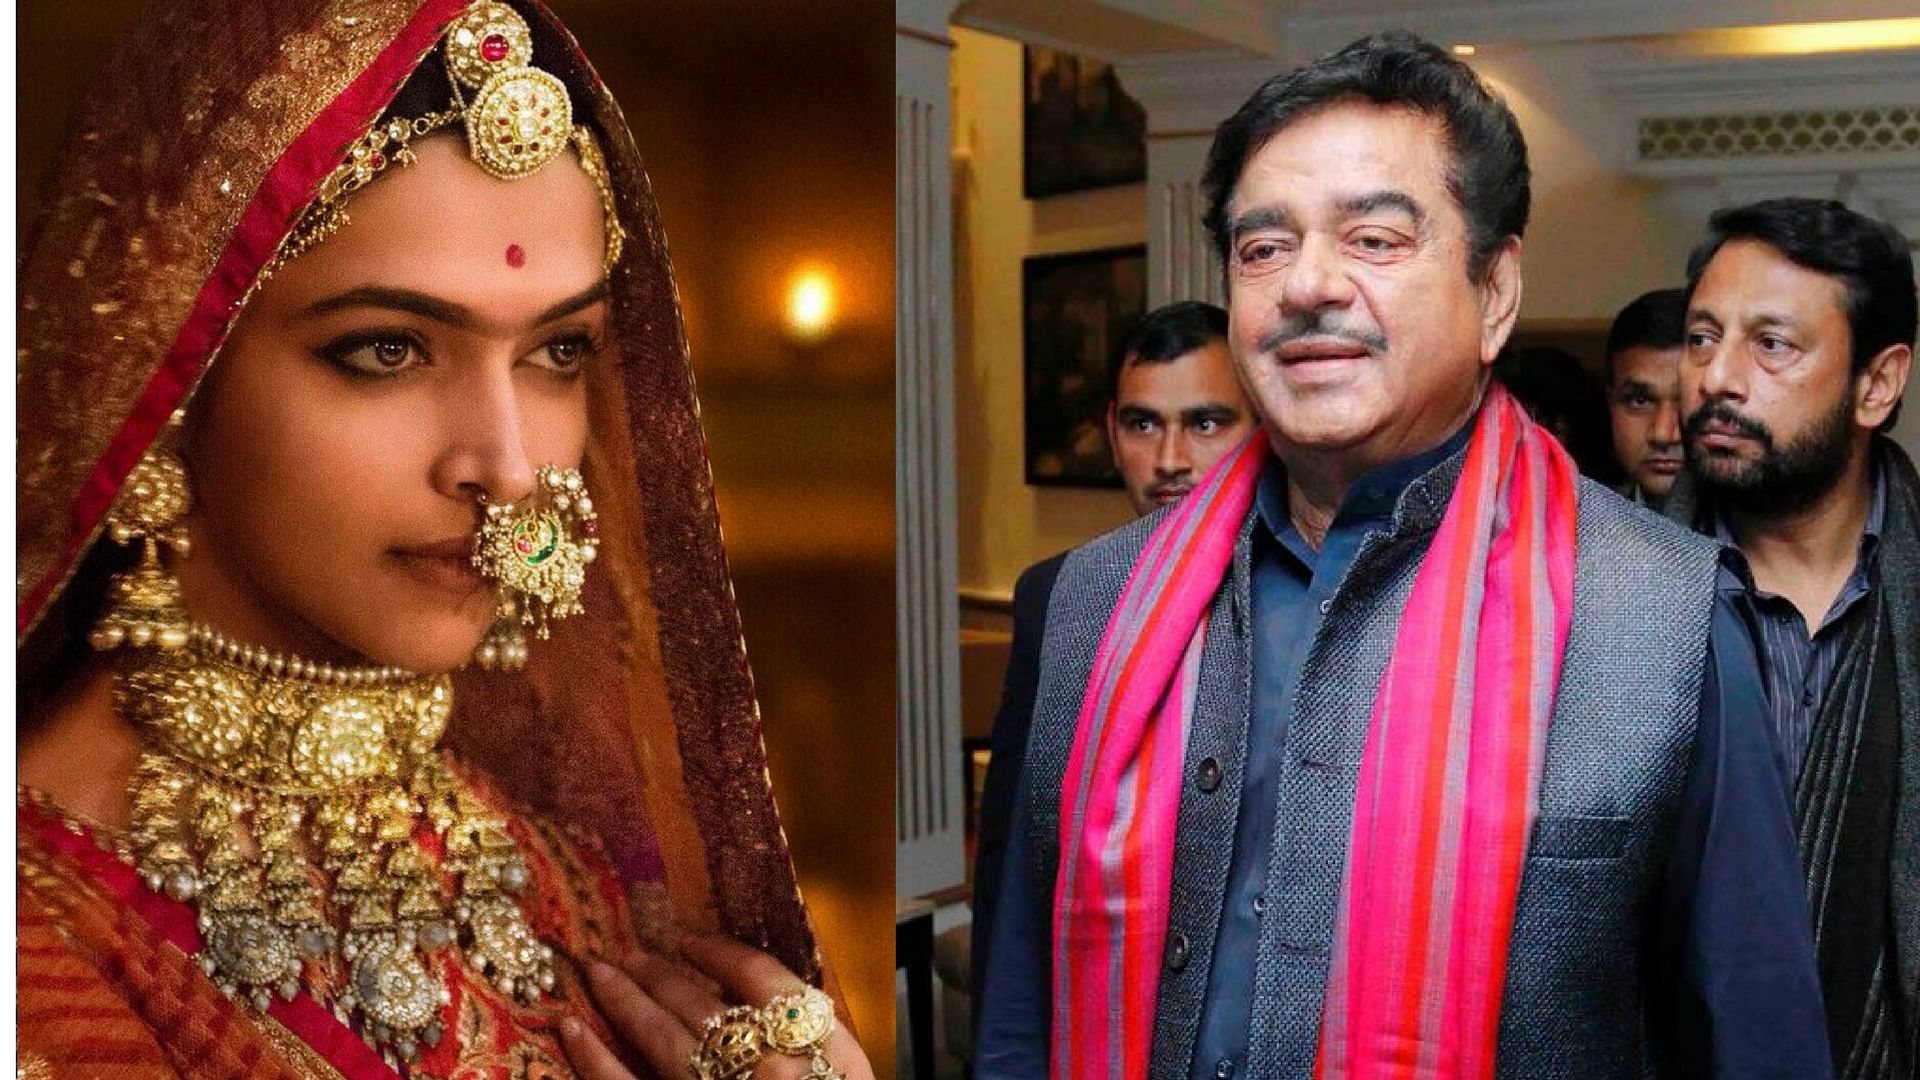 Shatrughan Sinha has questioned the silence of celebrities over the <i>Padmavati </i>issue.